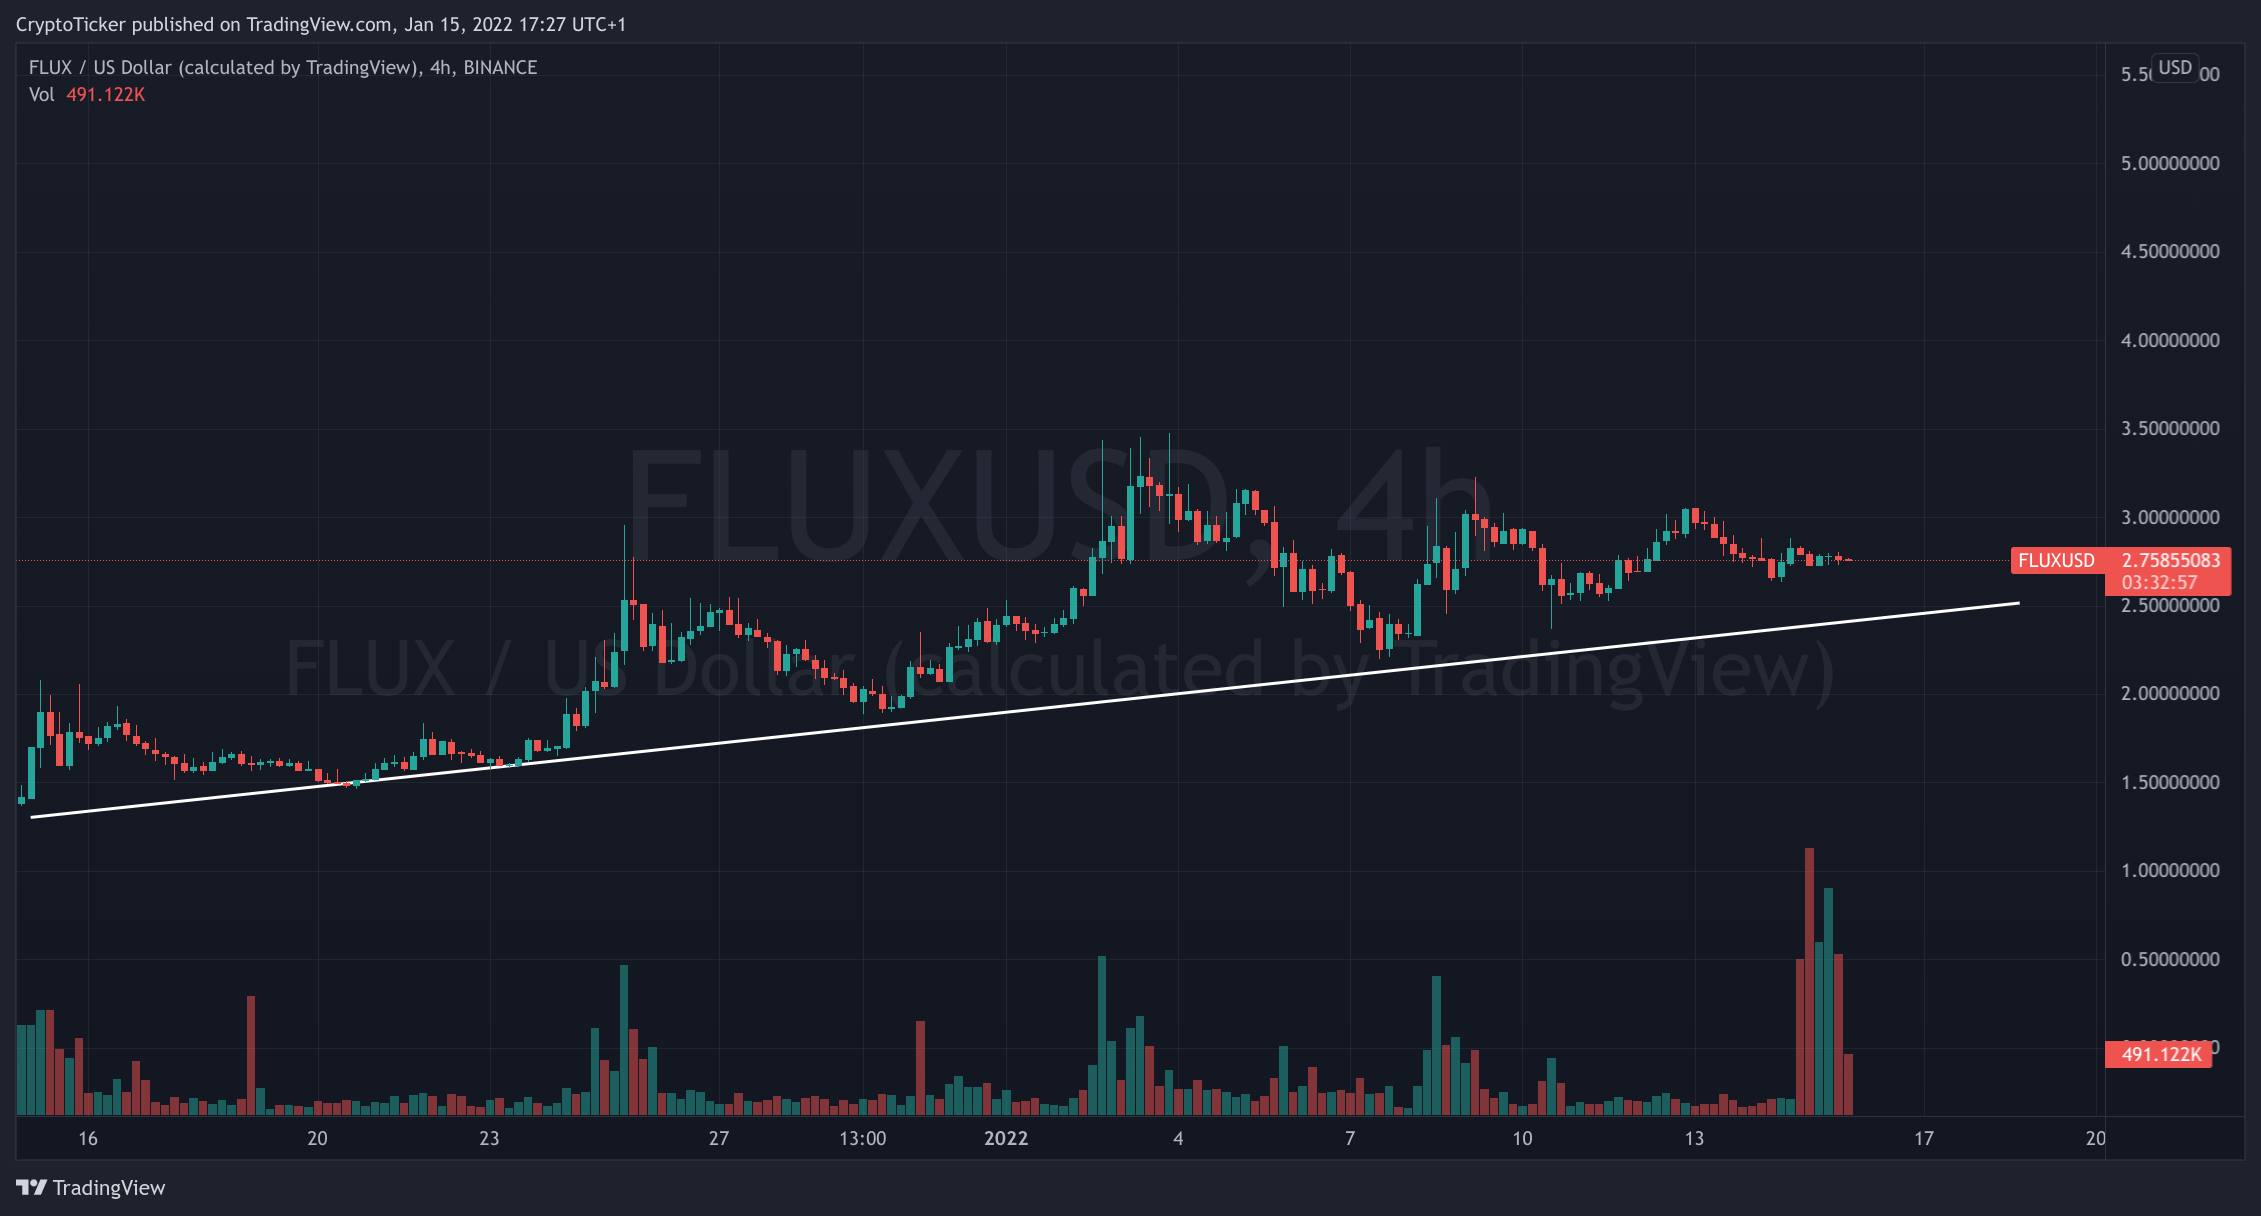 FLUX/USD 4-hour chart showing the increase in FLUX 